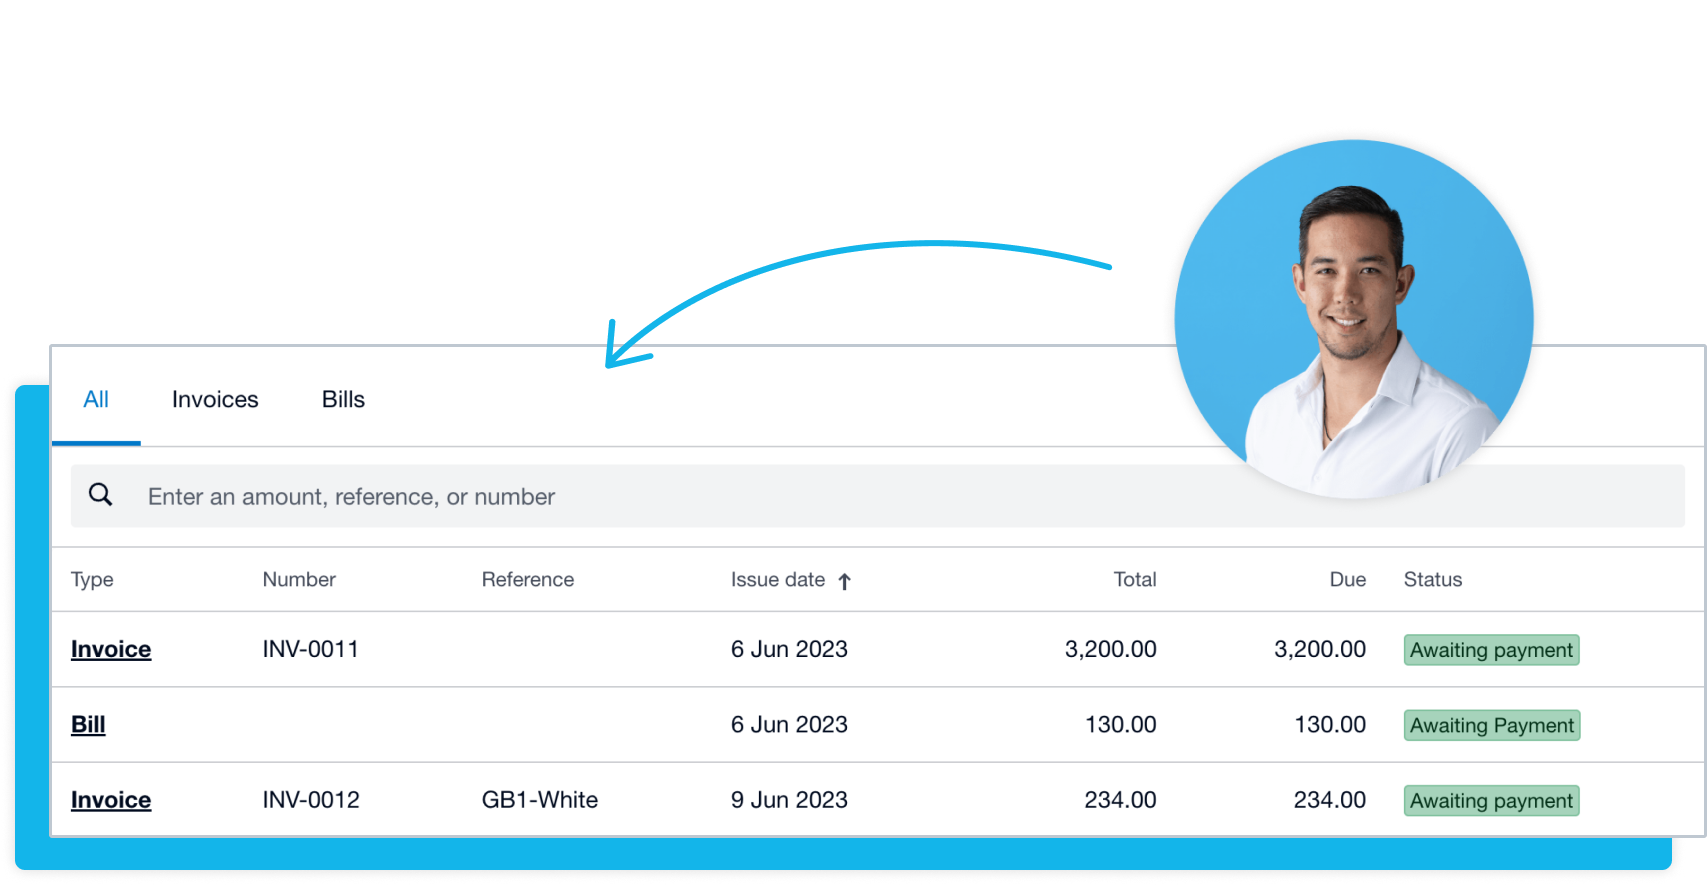 Transaction history of a Xero contact showing activity and notes.